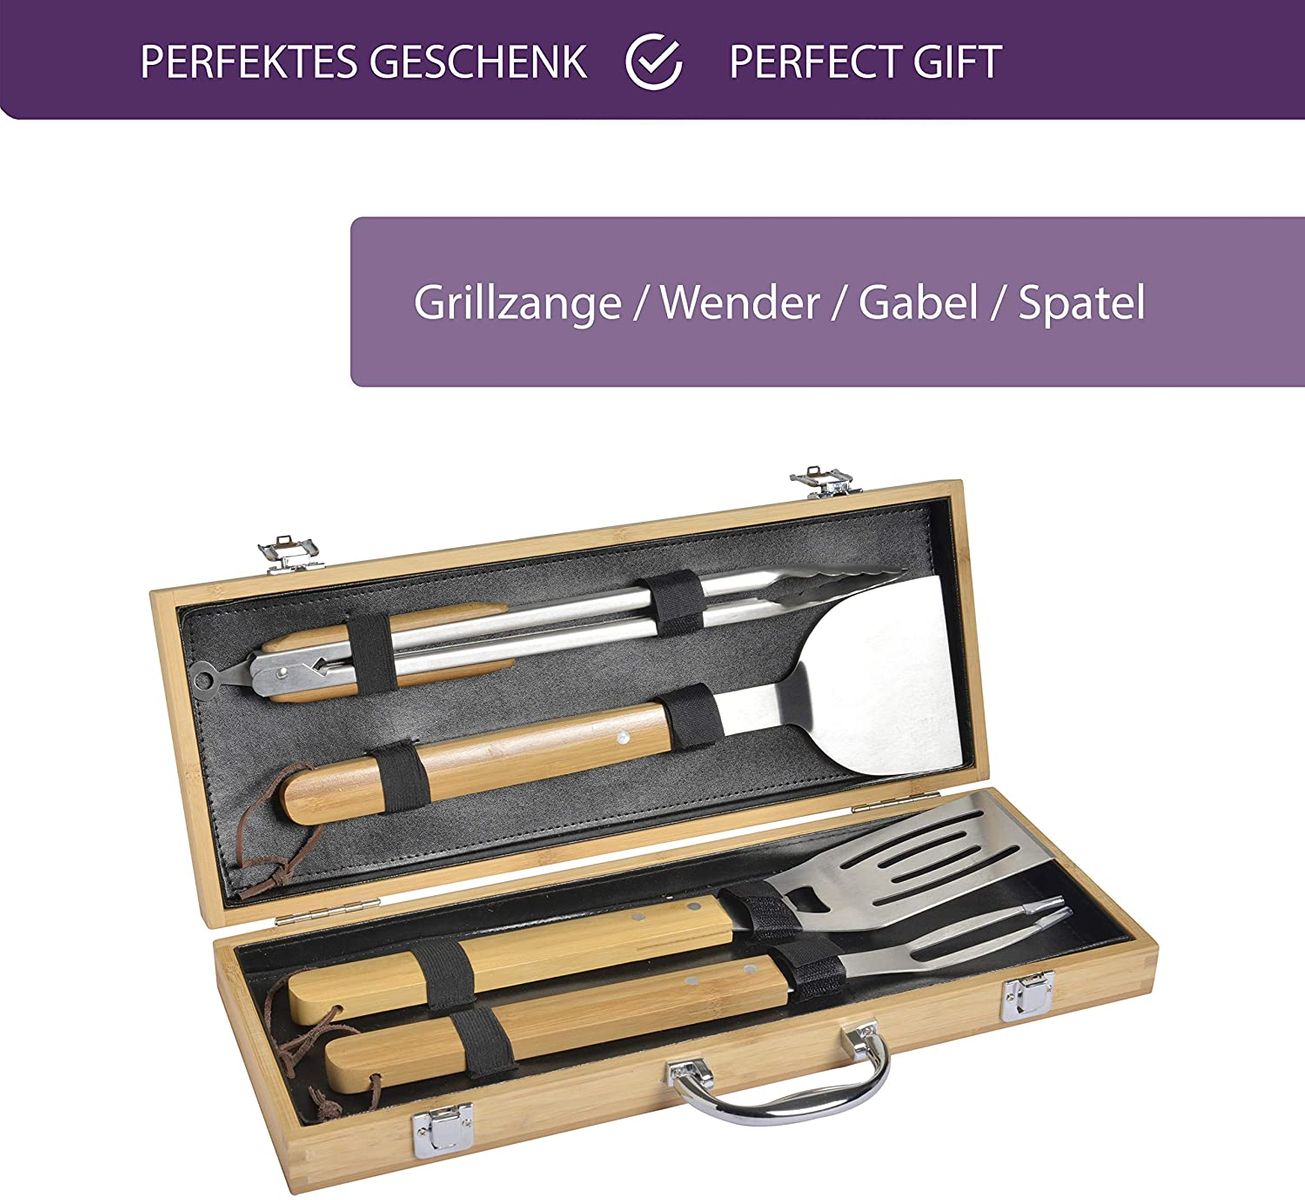 Mastrad F19266 Grill cutlery set (4 pieces) - made of bamboo and stainless steel - barbecue accessories with barbecue tongs, barbecue turner and meat fork - in practical wooden case